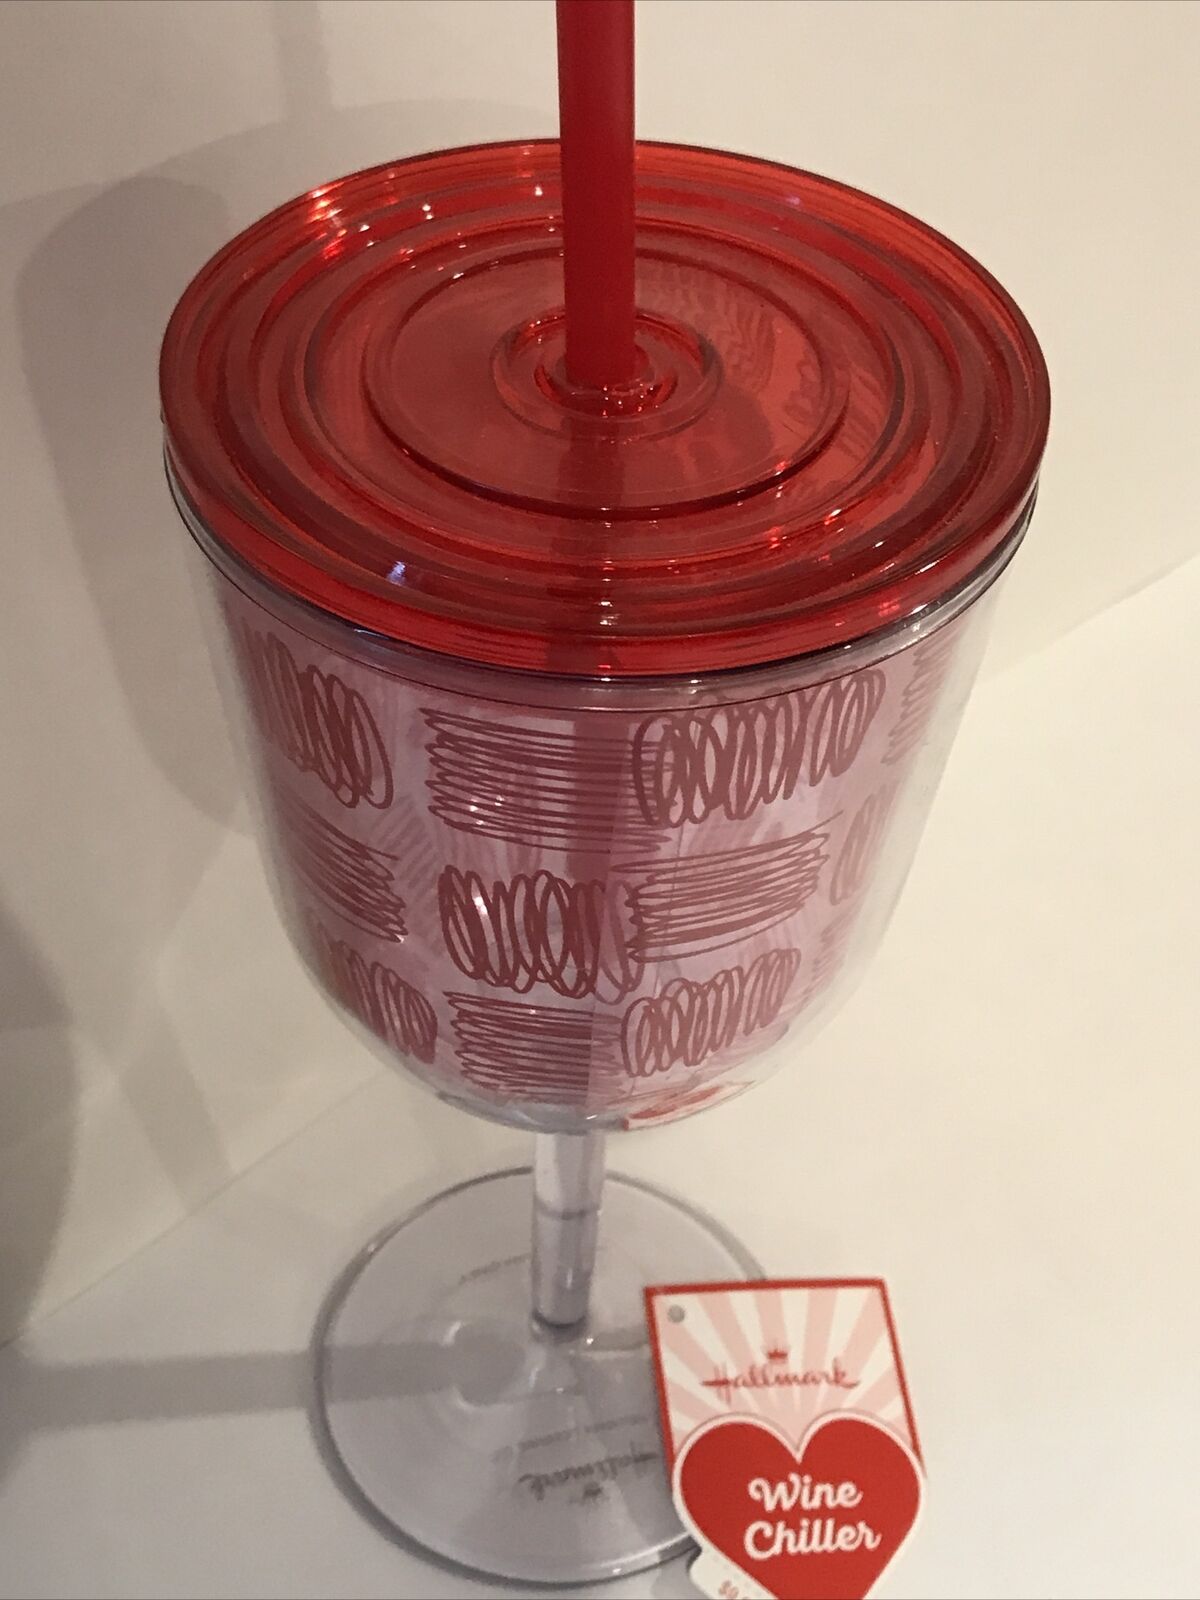 NWT Hallmark Wine Chiller Plastic Straw Cup Valentine’s Day Happier by the  Hour